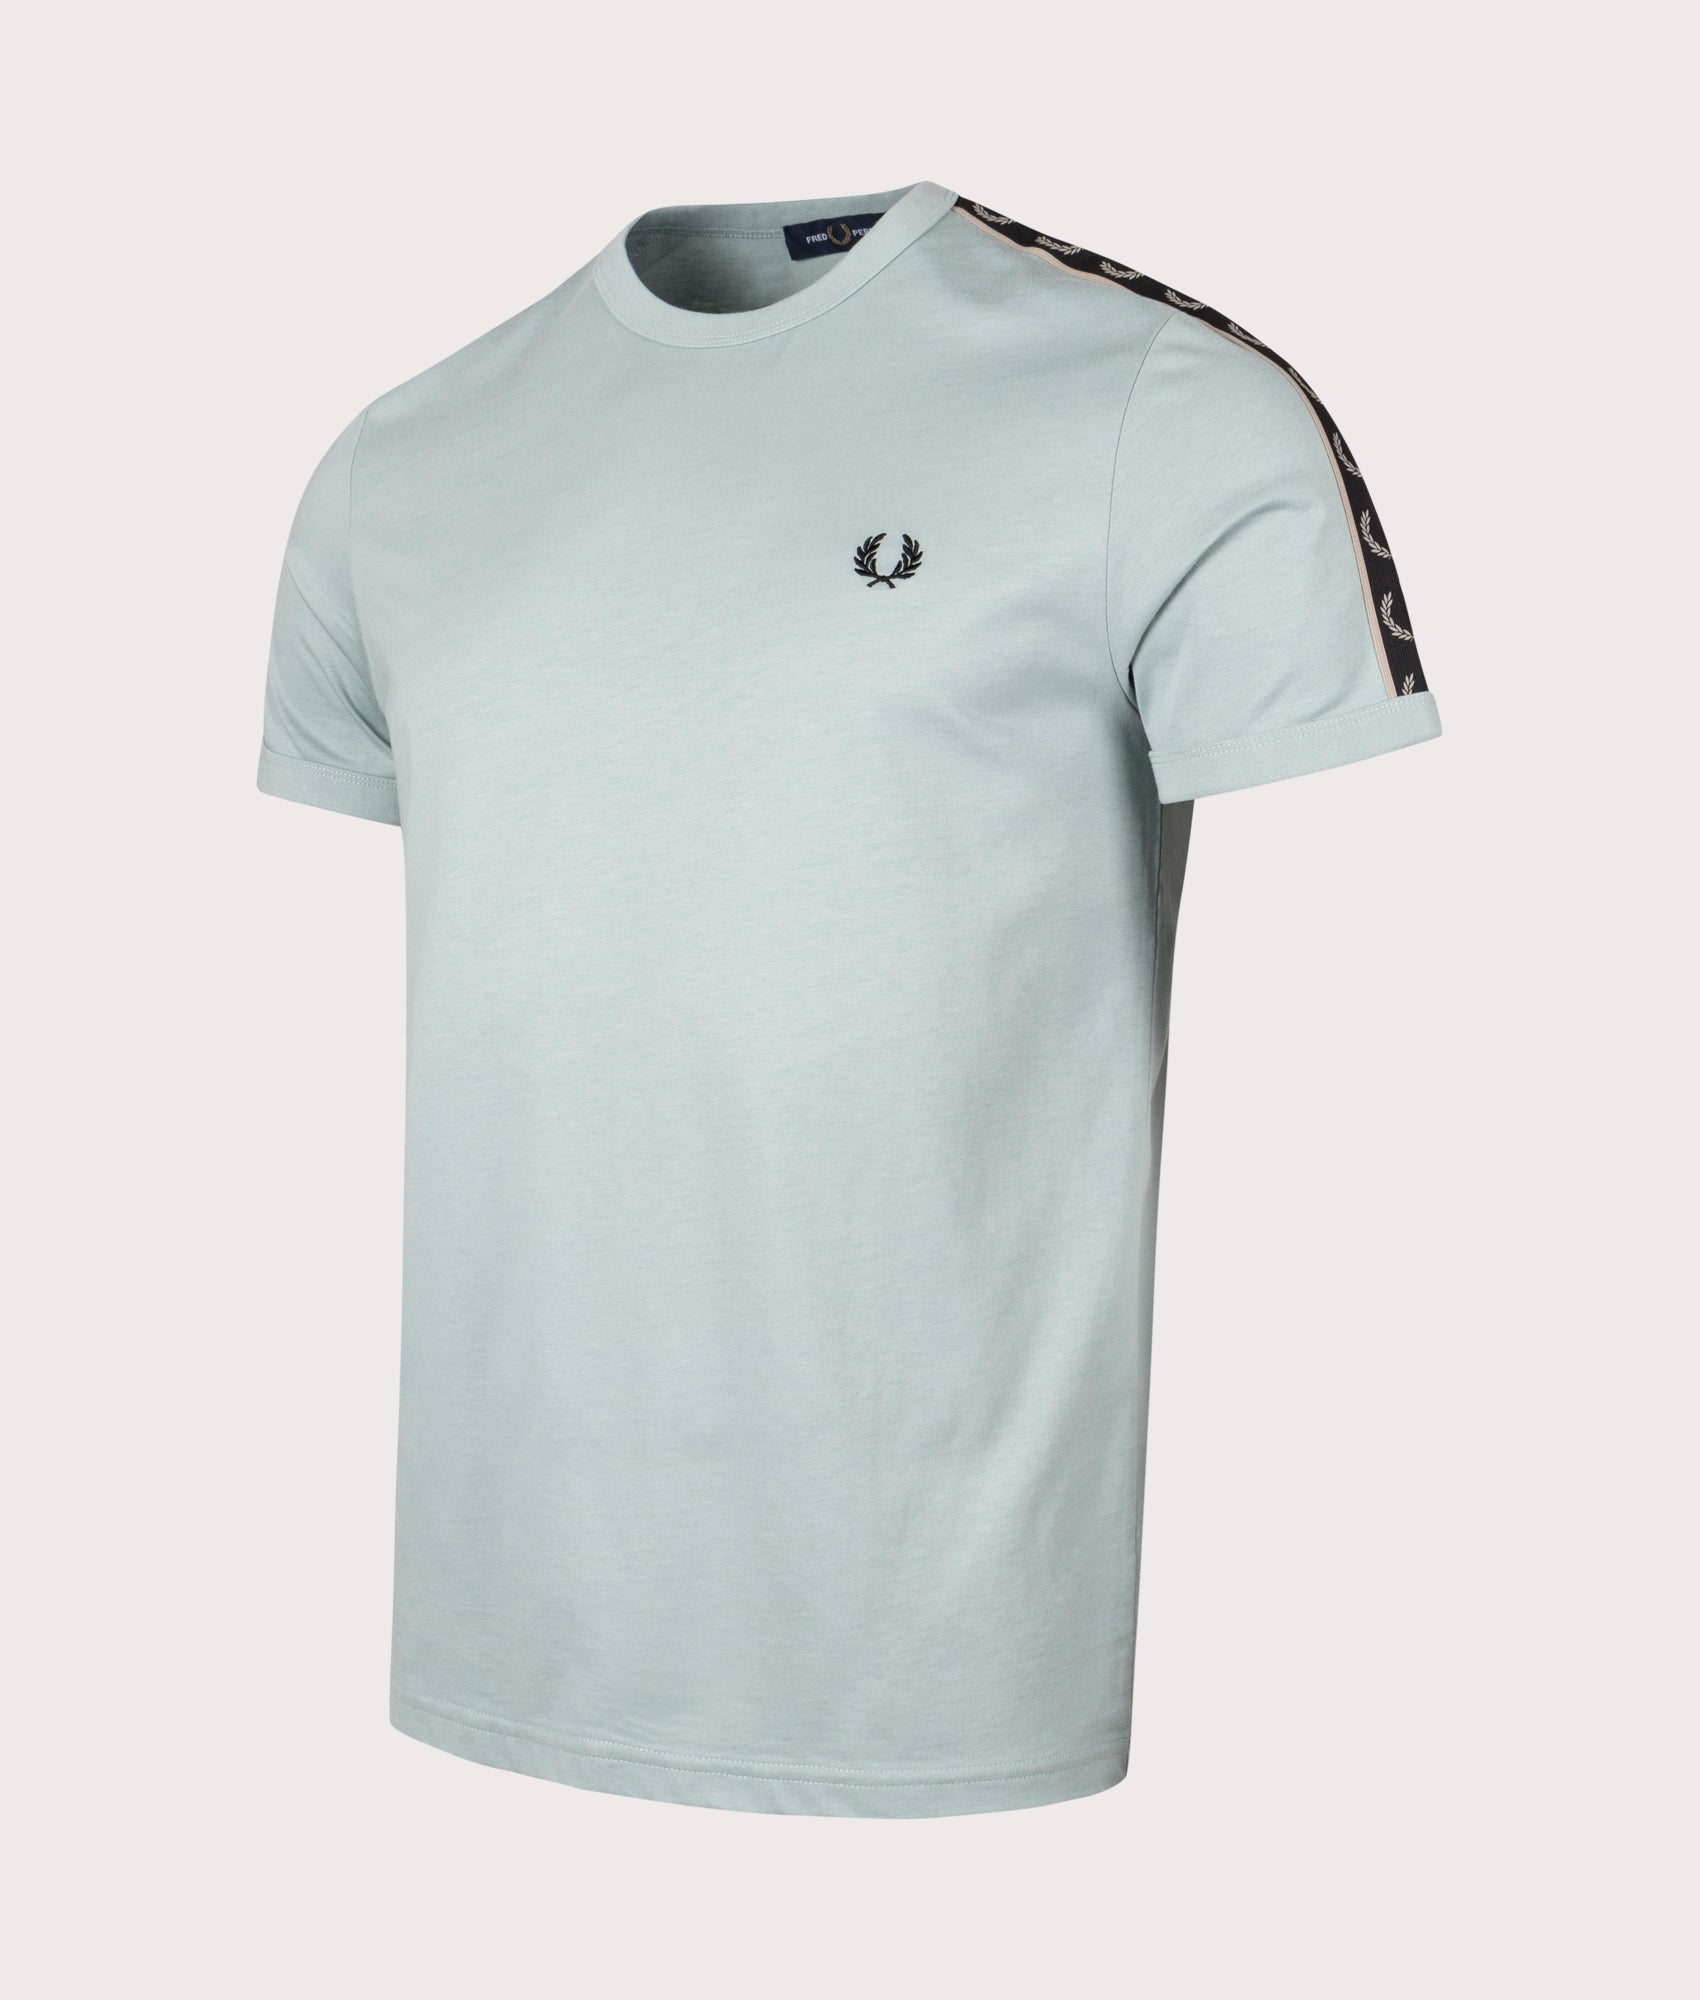 Fred Perry Mens Contrast Tape Ringer T-Shirt - Colour: W26 Silver Blue/Warm Grey - Size: XXL